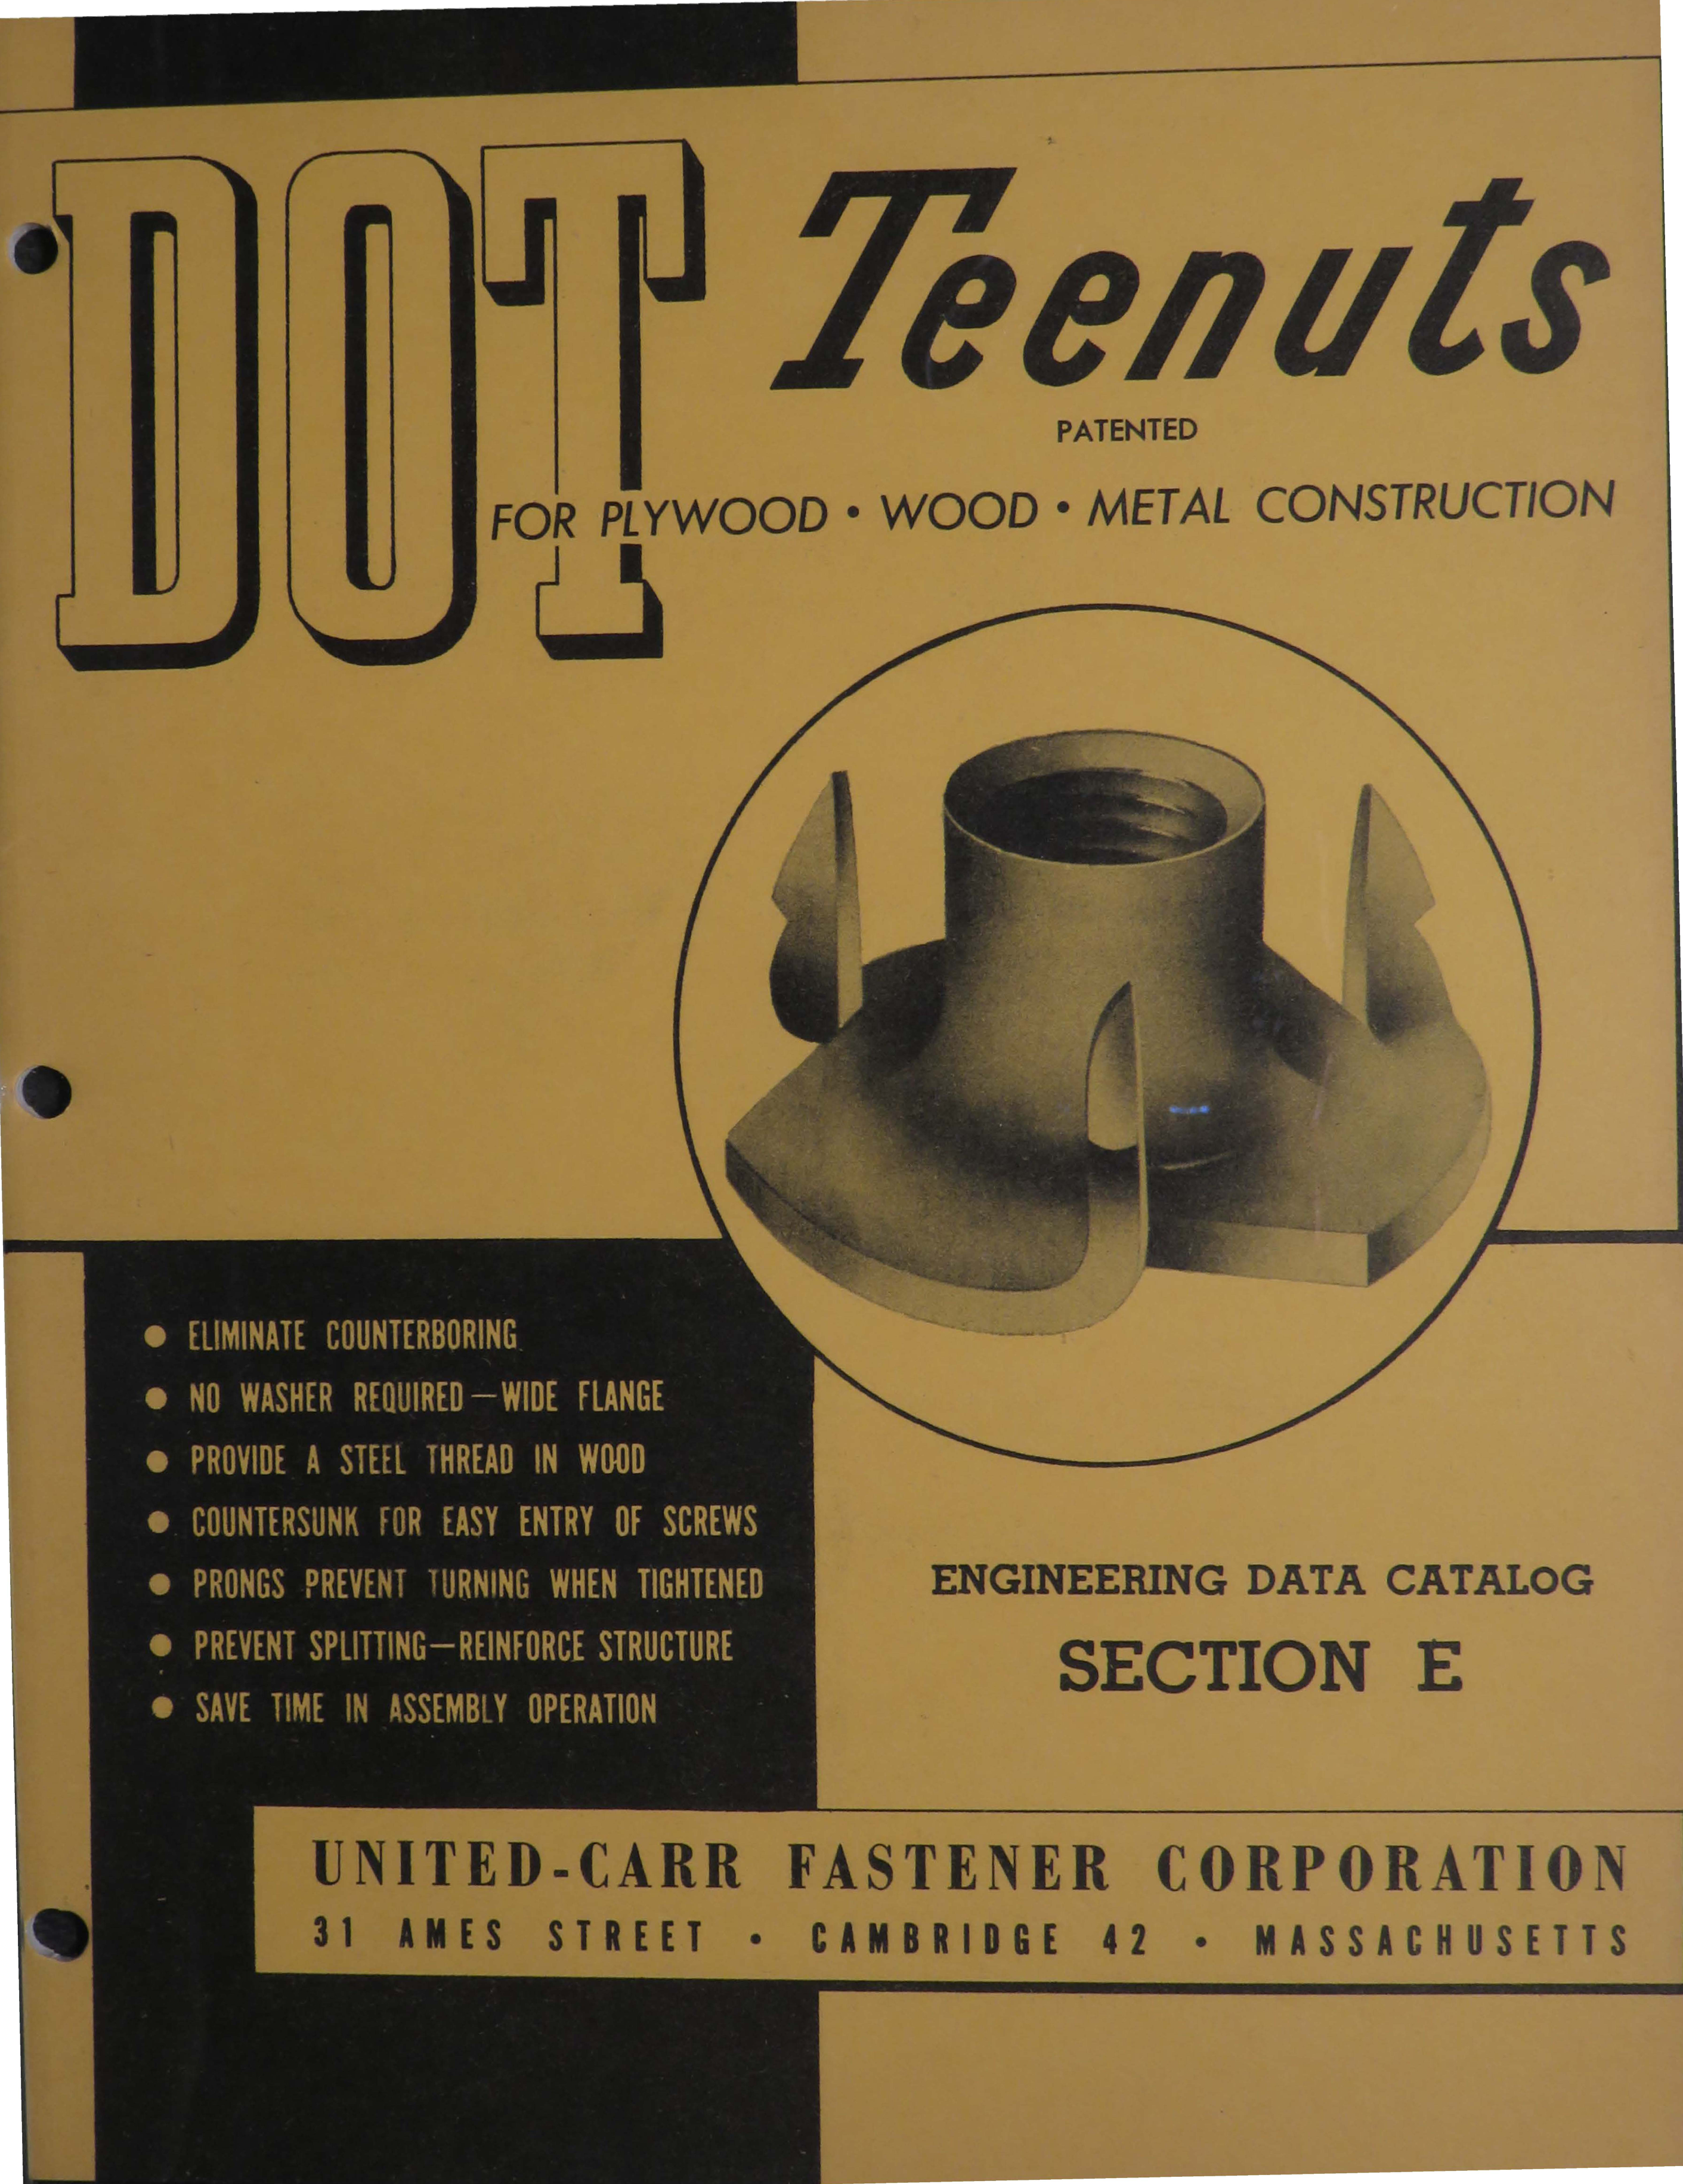 Sample page 1 from AirCorps Library document: Engineering Data Catalog for DOT Teenuts for Plywood, Wood and Metal Construction